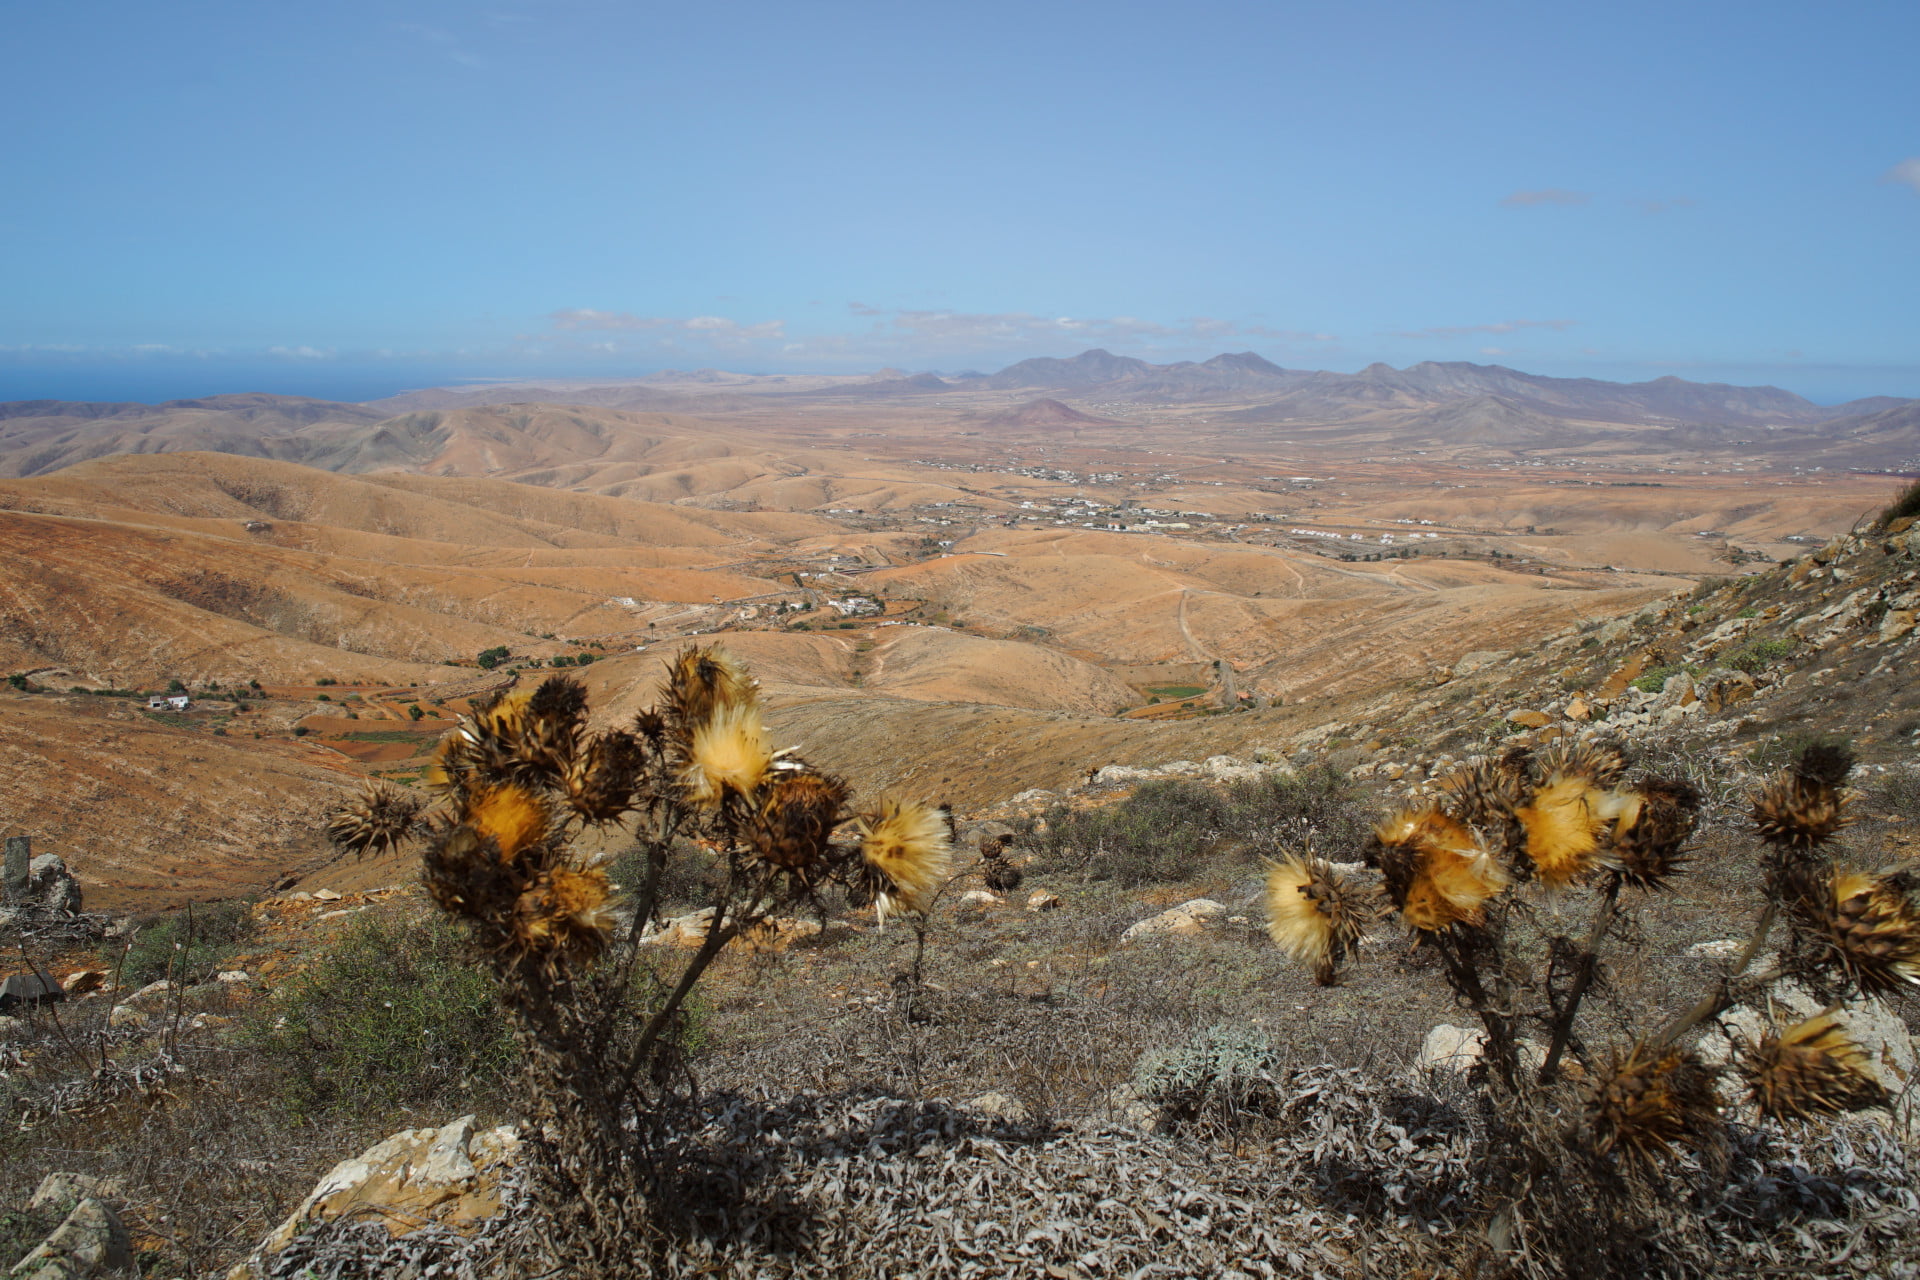 View of the parched landscape from Mirador Guise y Ayose